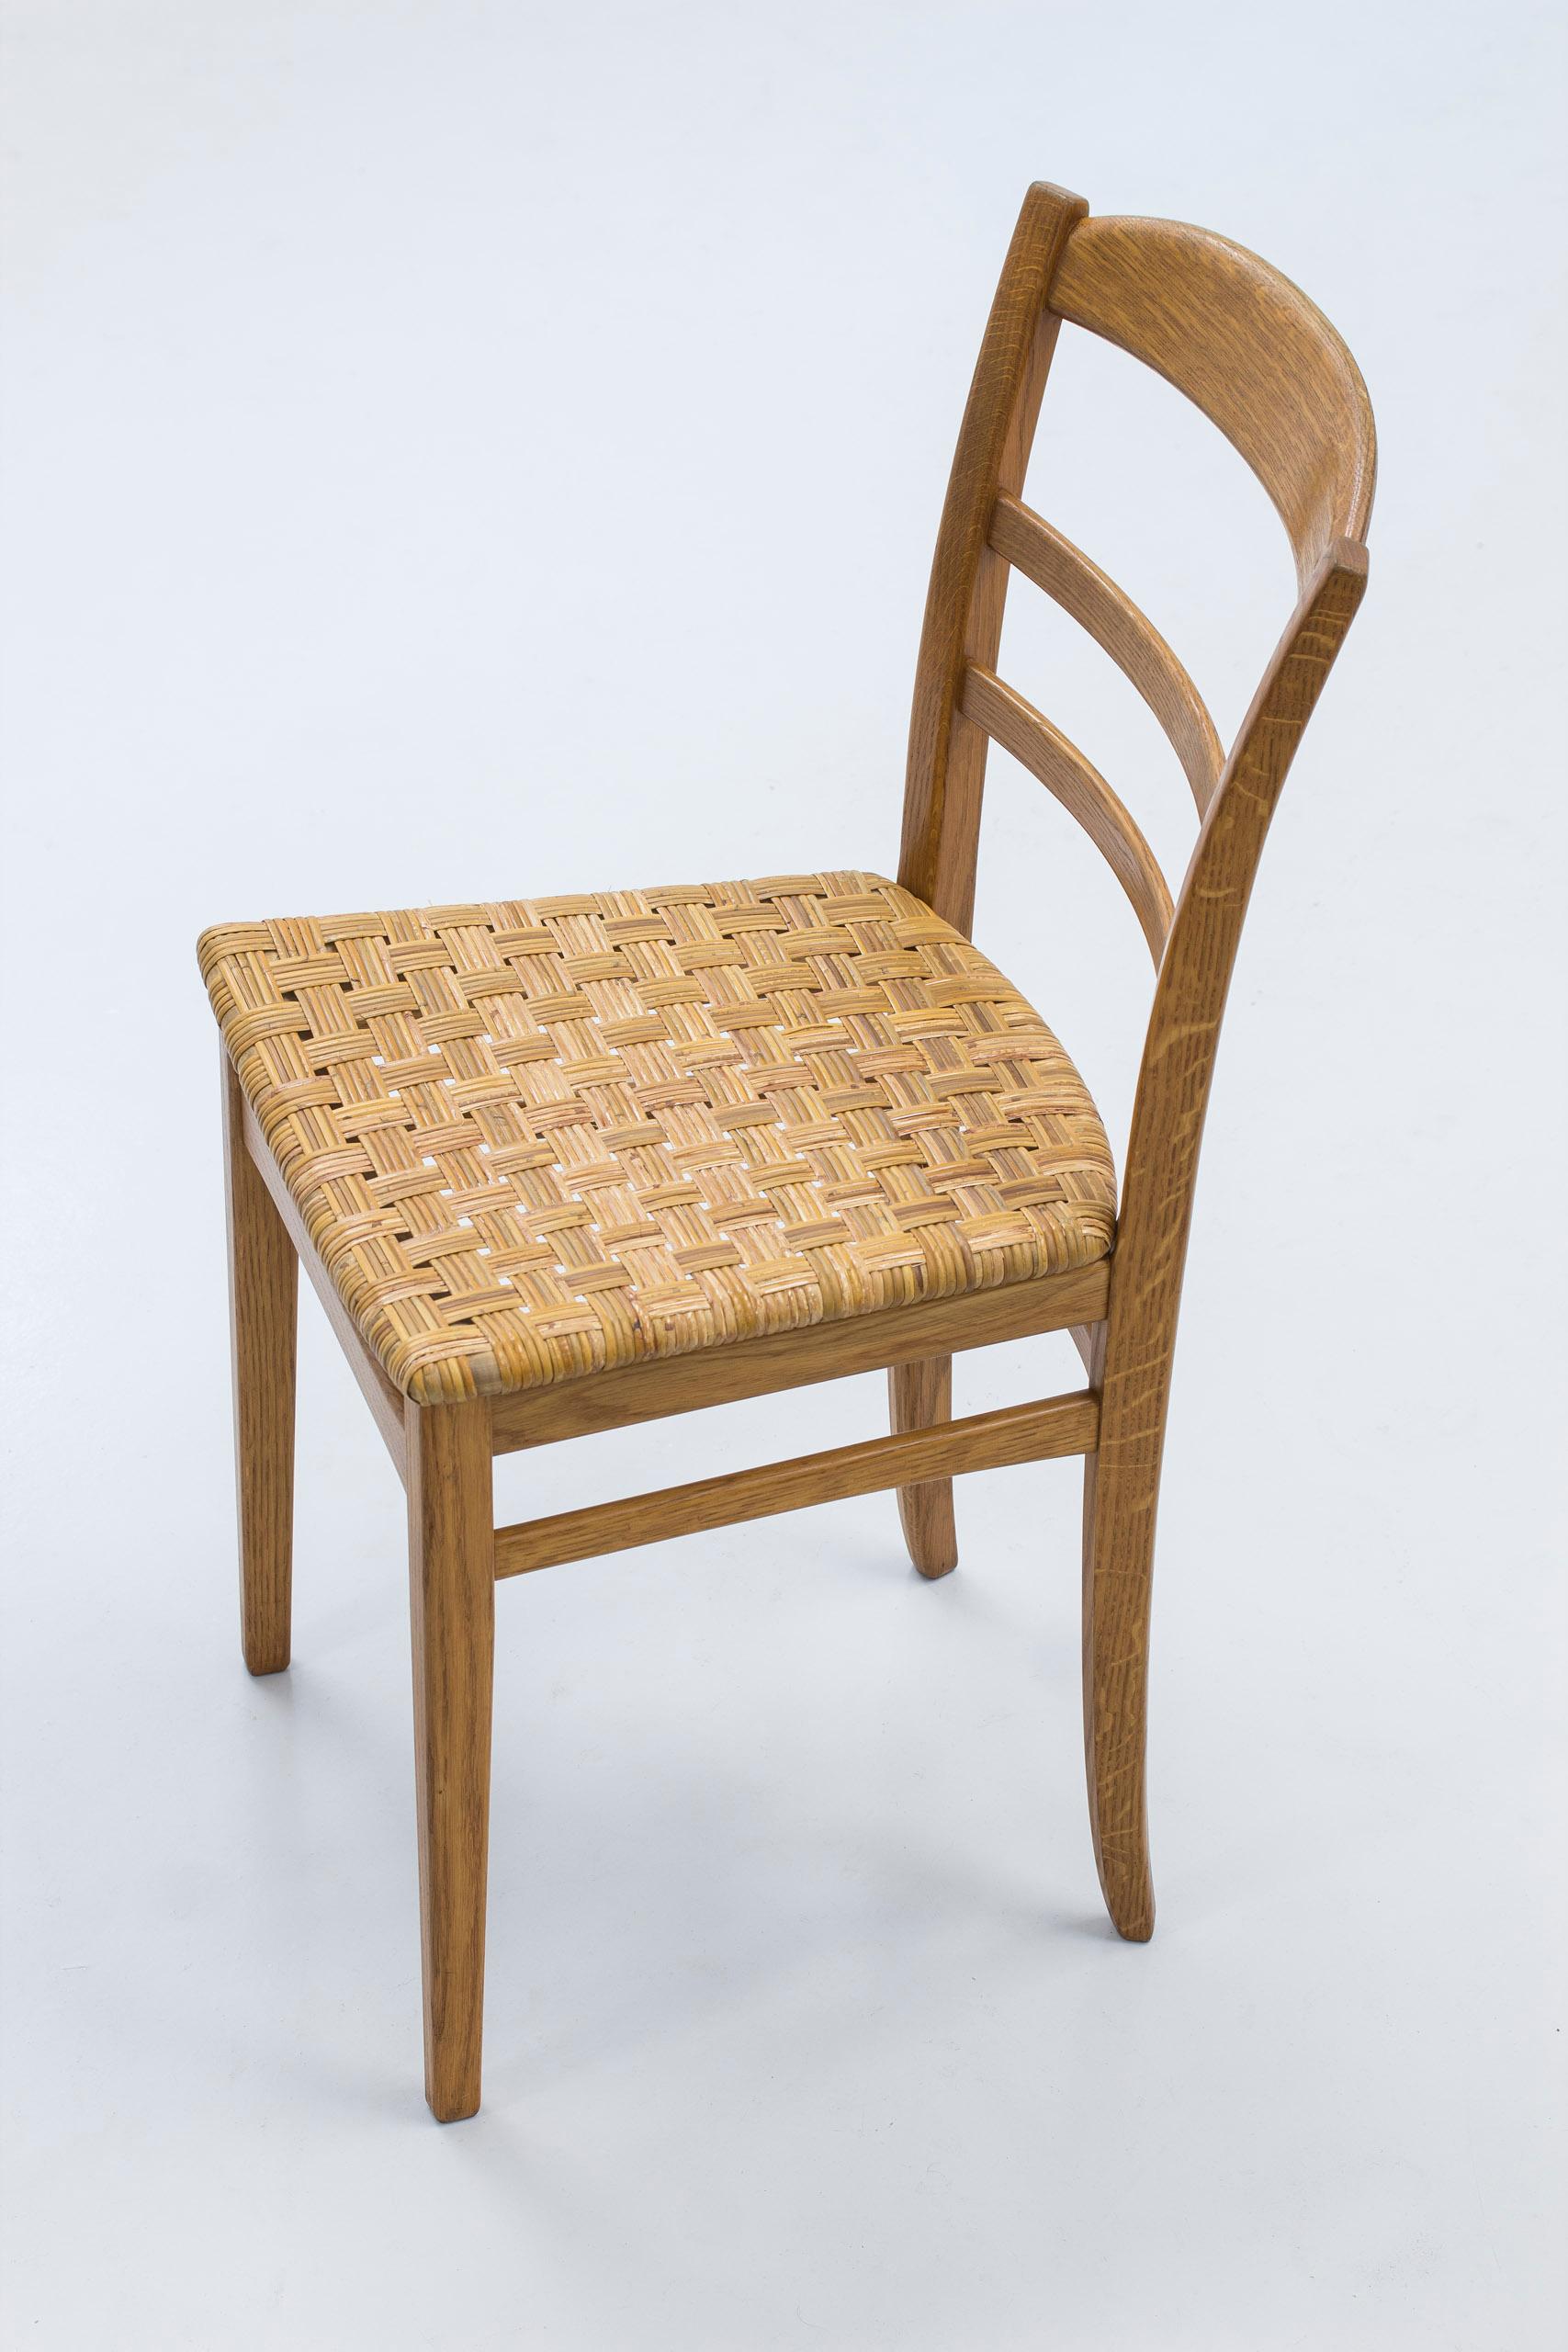 Mid-20th Century Oak and Cane Weave Dining Chairs by Carl Malmsten, Swedish Modern, 1950s For Sale